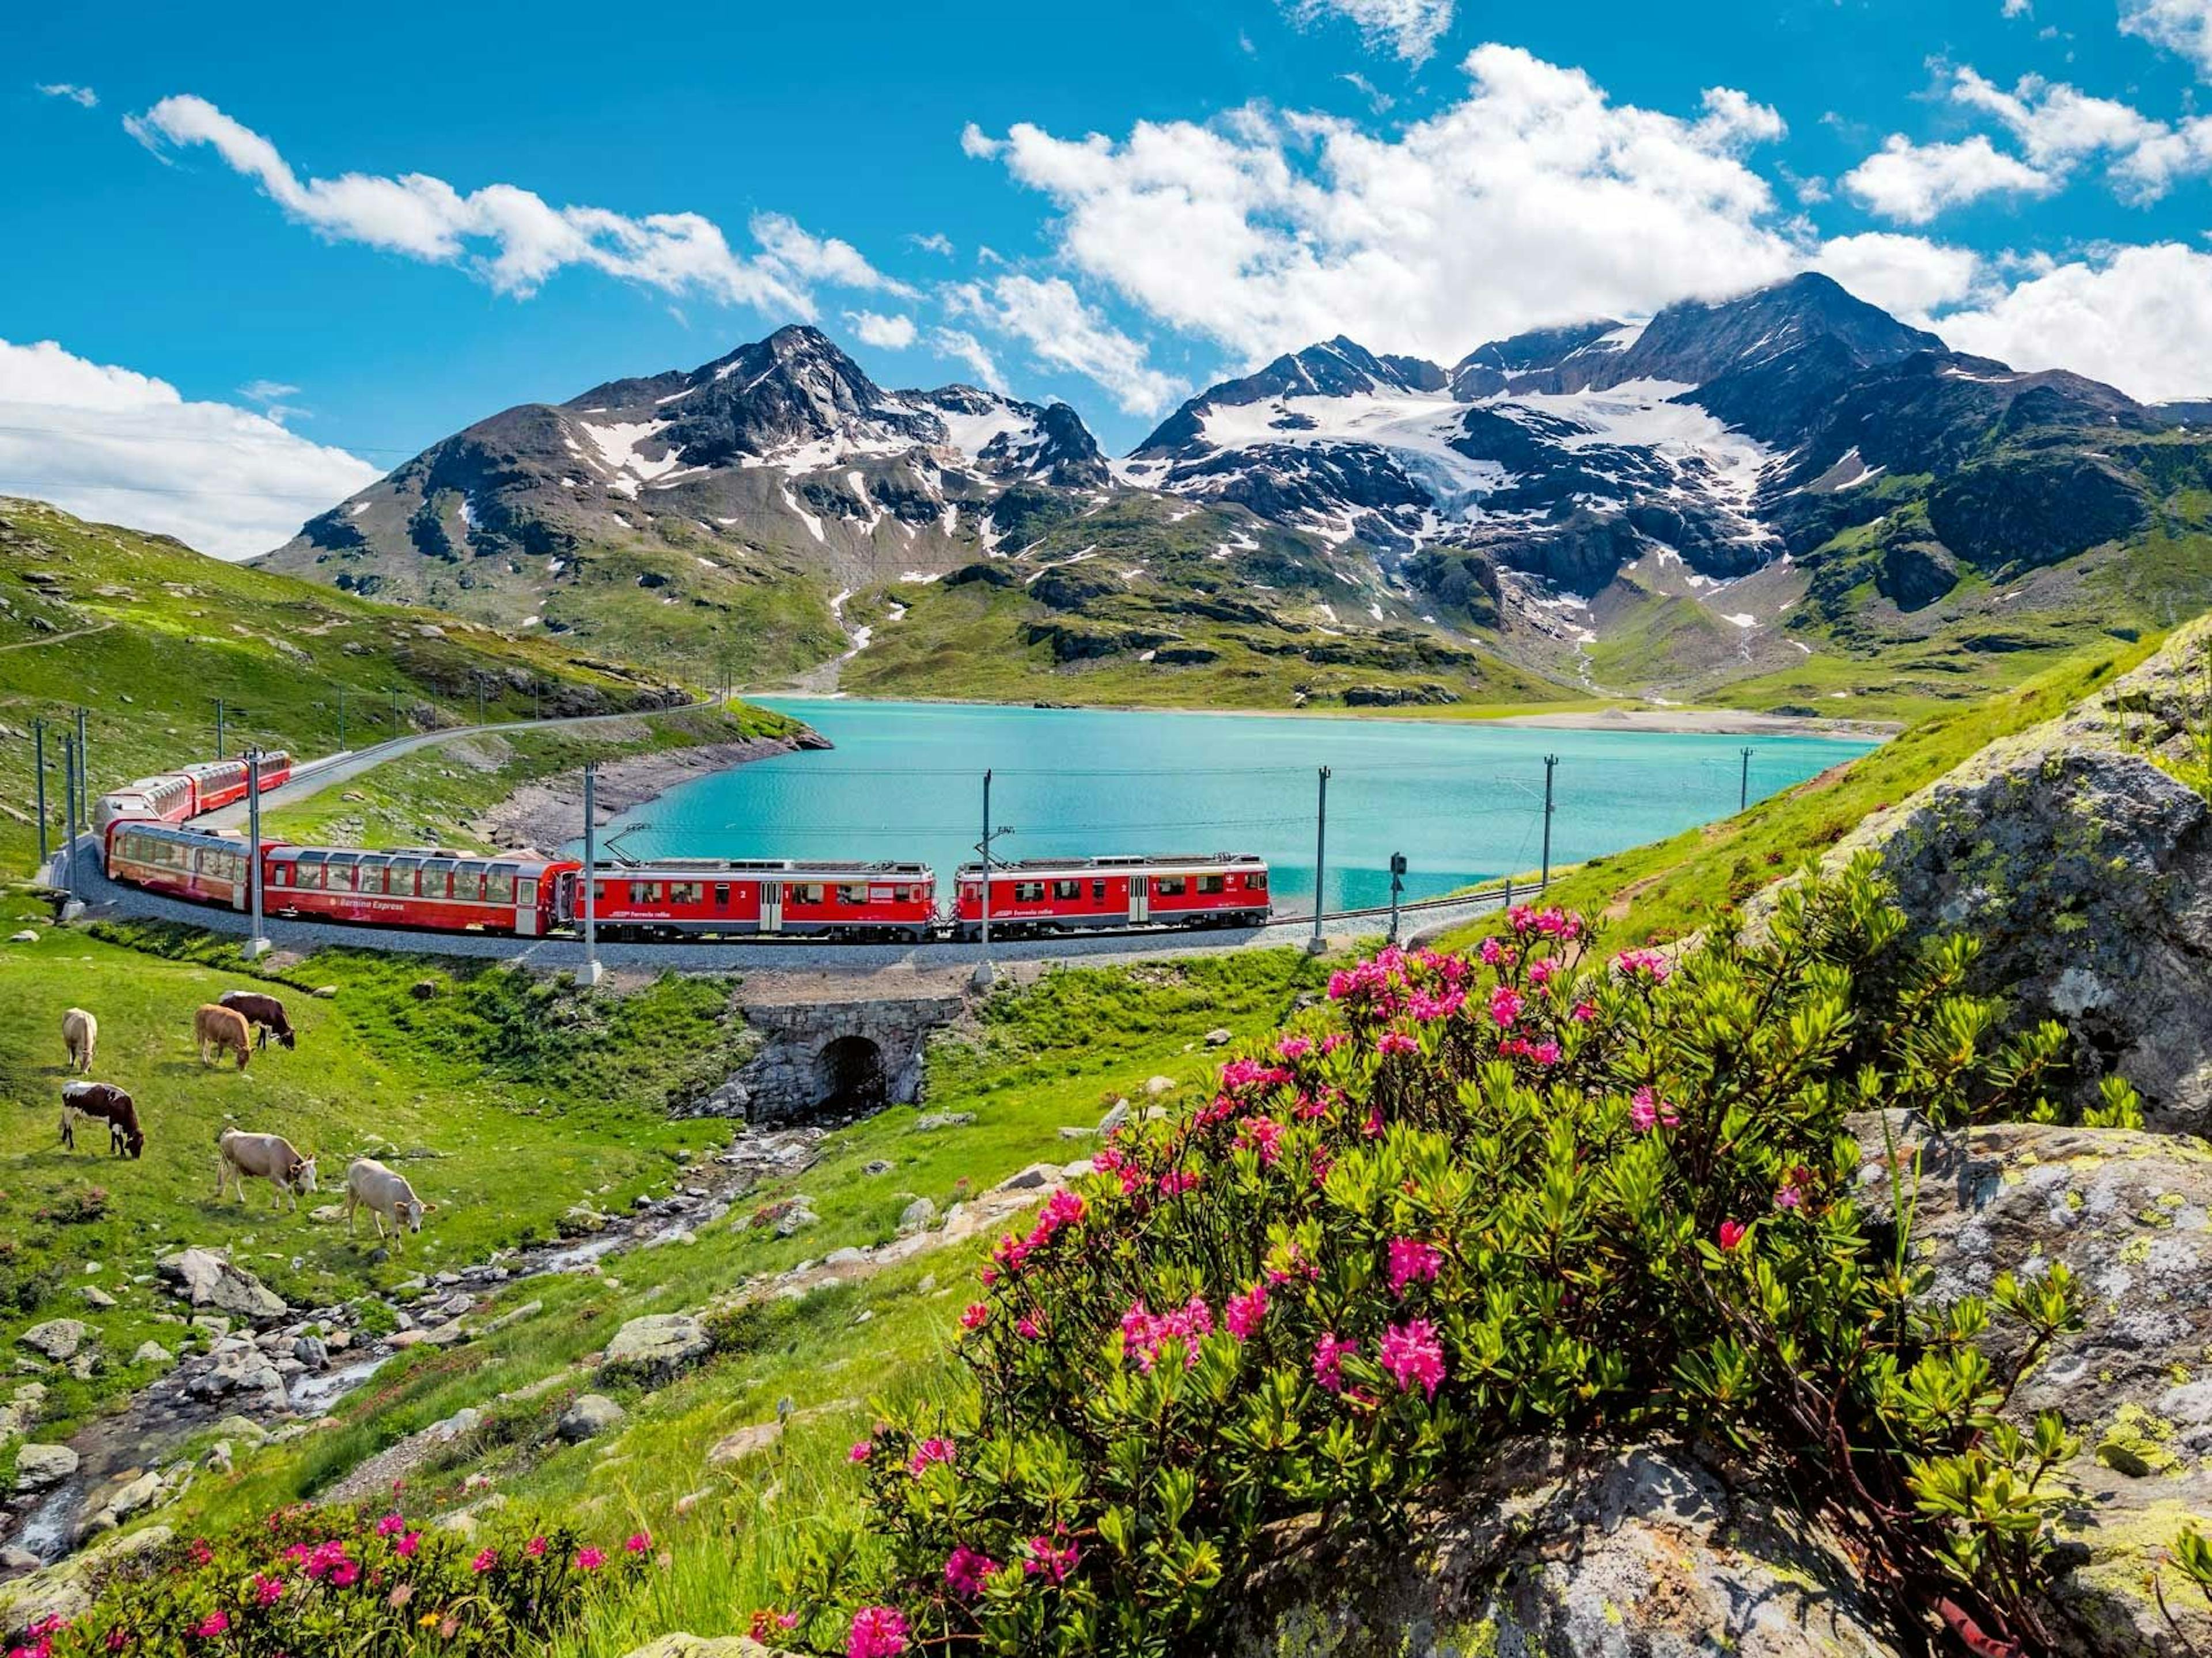 swiss travel pass routes